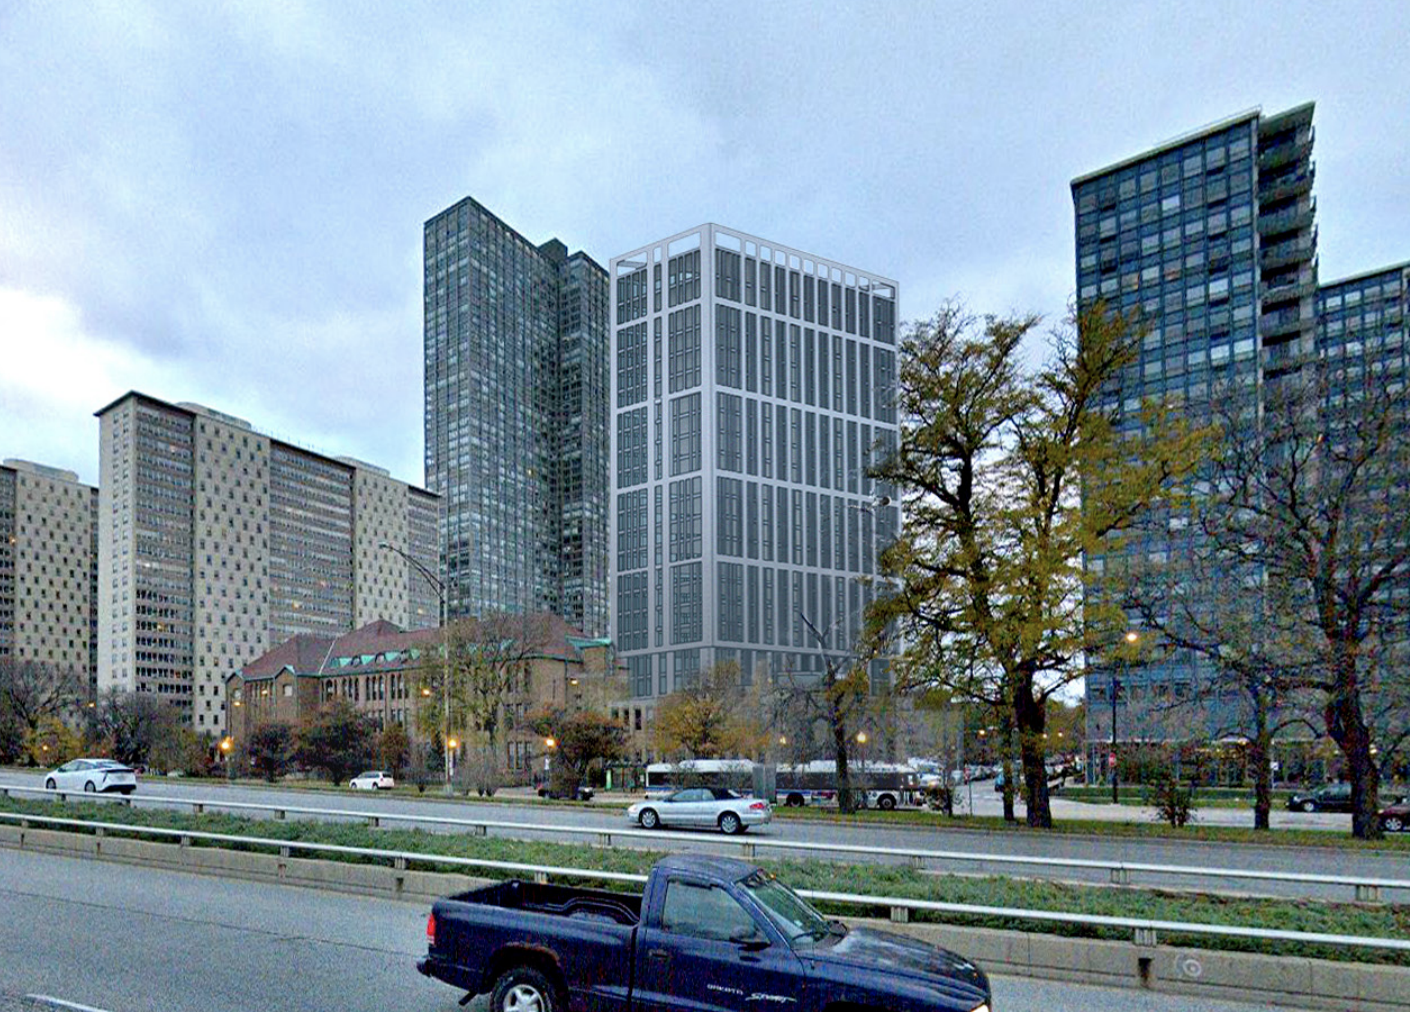 A tall building stands in line with other taller buildings next to low-rise school buildings along Lake Shore Drive.